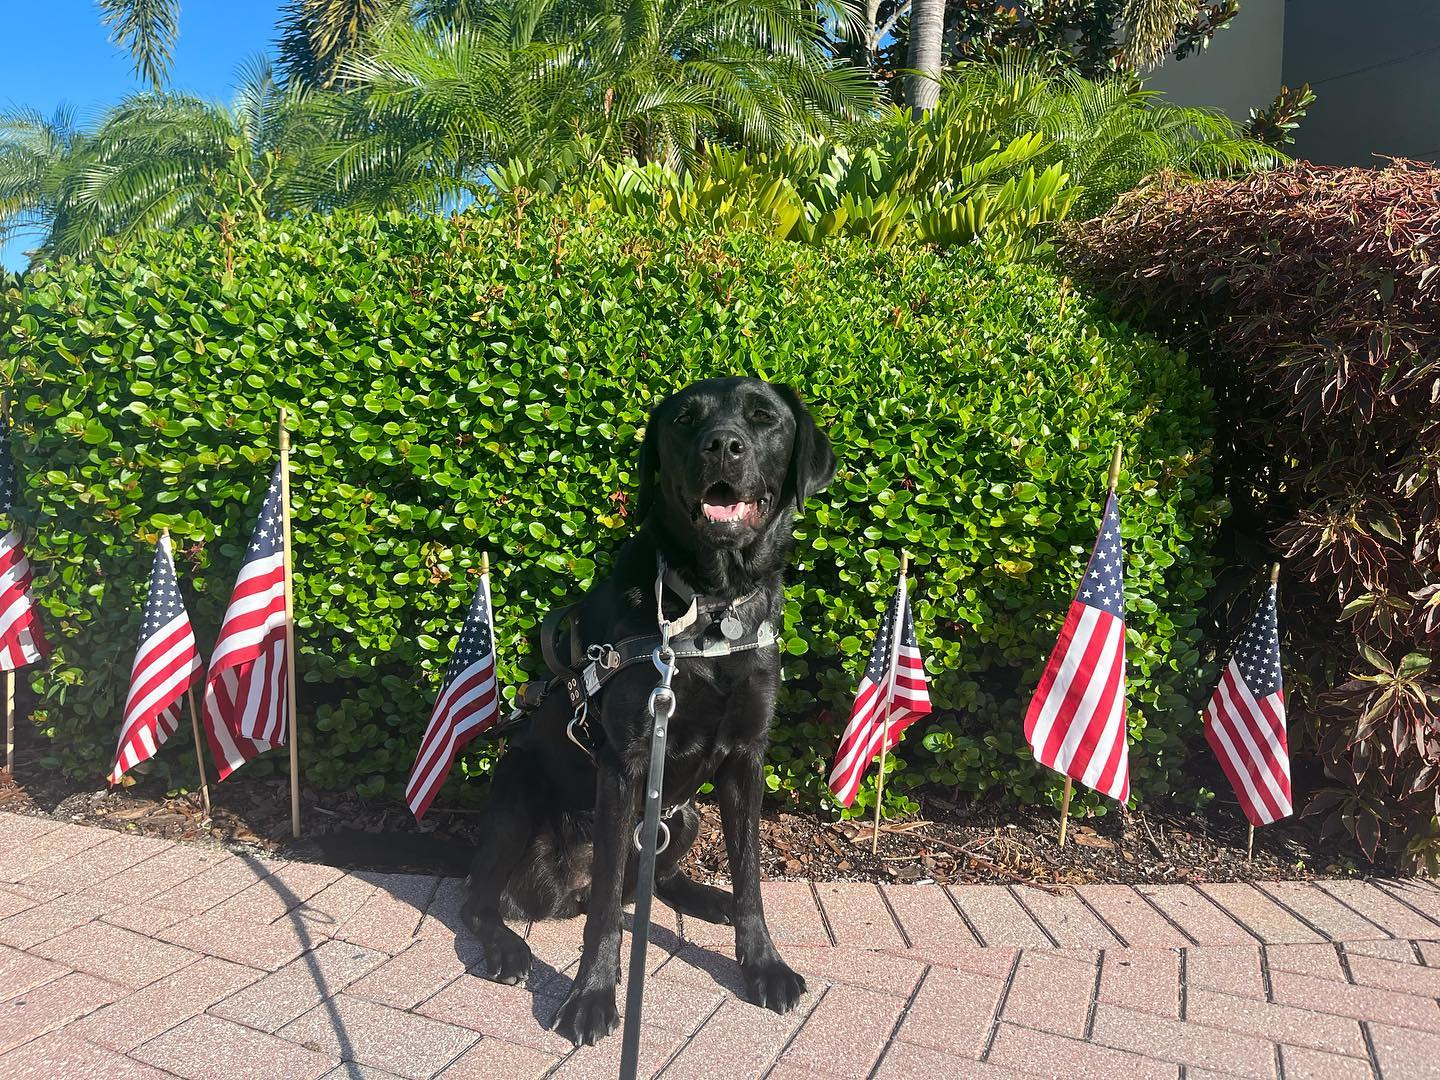 A black lab in a guide dog harness sits in front of a line of American Flags in a garden.